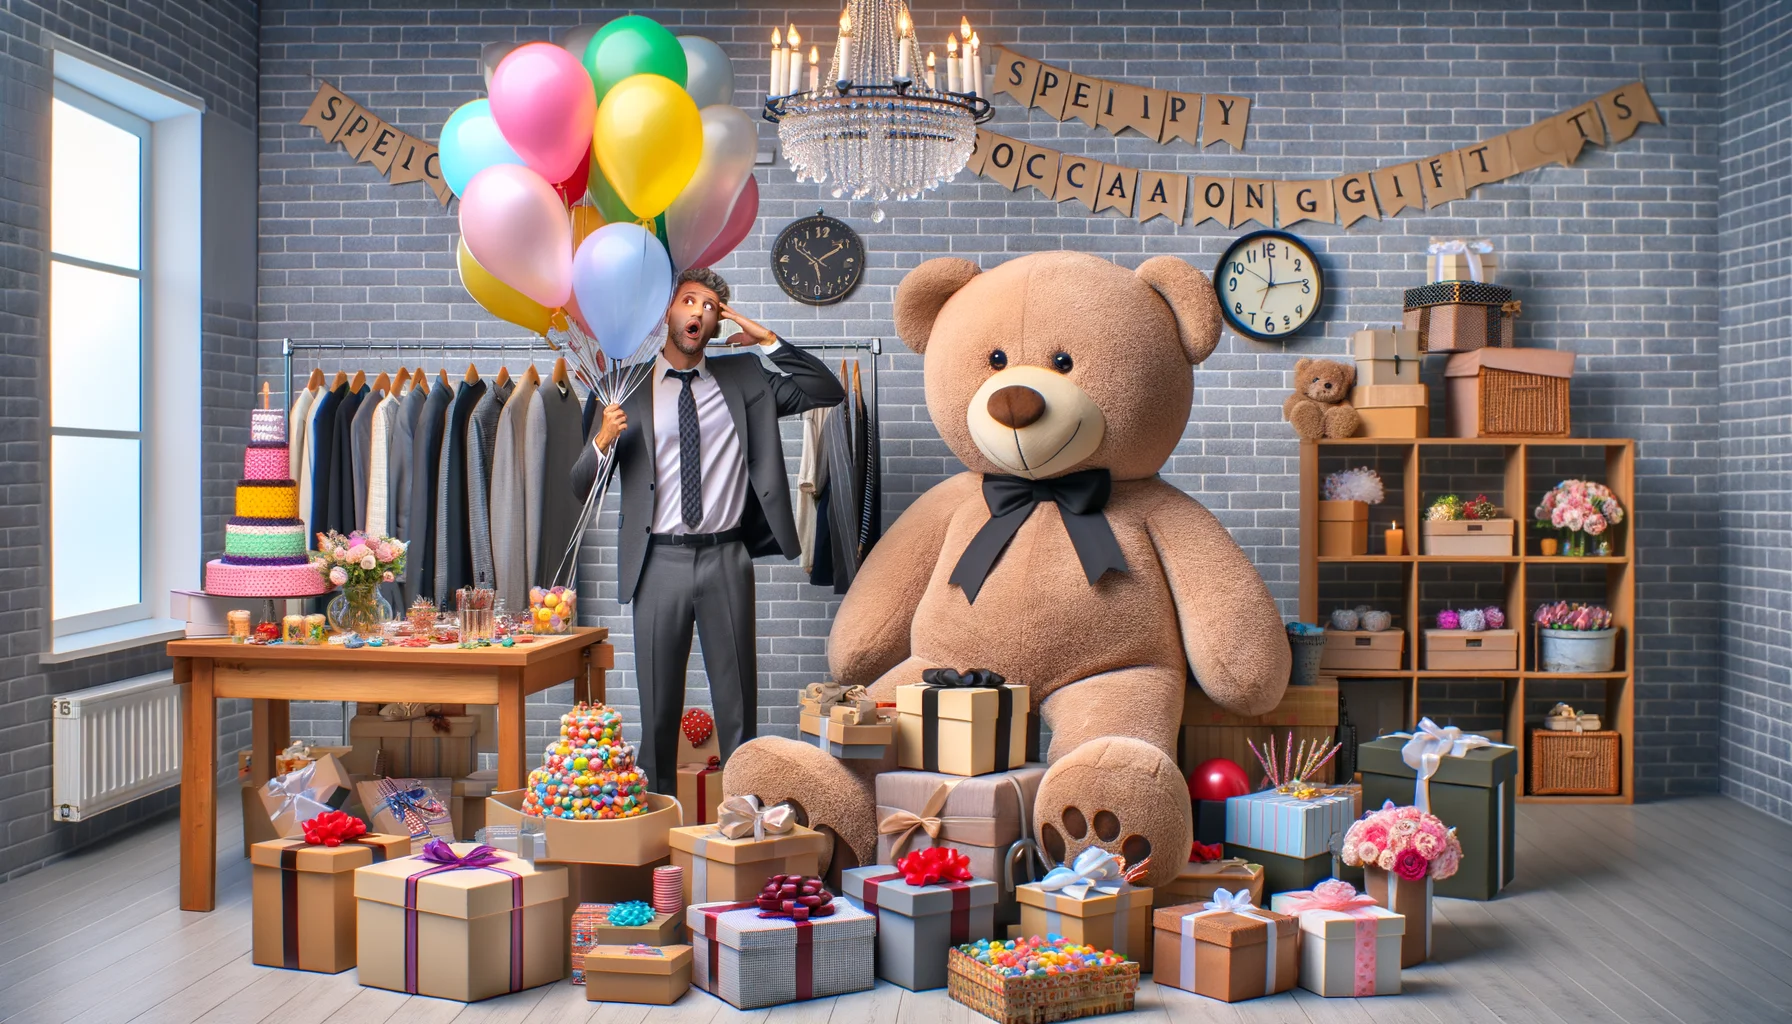 Create a humorous and lifelike image focused on the theme of 'Special Occasion Gifts'. Visualize a well-organized gift shop filled with a diverse range of gifts suitable for all sorts of occasions: birthdays, anniversaries, graduations, and more. Mix humor elements in the scene, for instance, a surprised mannequin holding an oversized teddy bear, a helium balloon stuck on a chandelier, or a candy bouquet toppling over a pyramid of gift boxes. Make sure each decorative item and gift conveys vibrancy and fun.